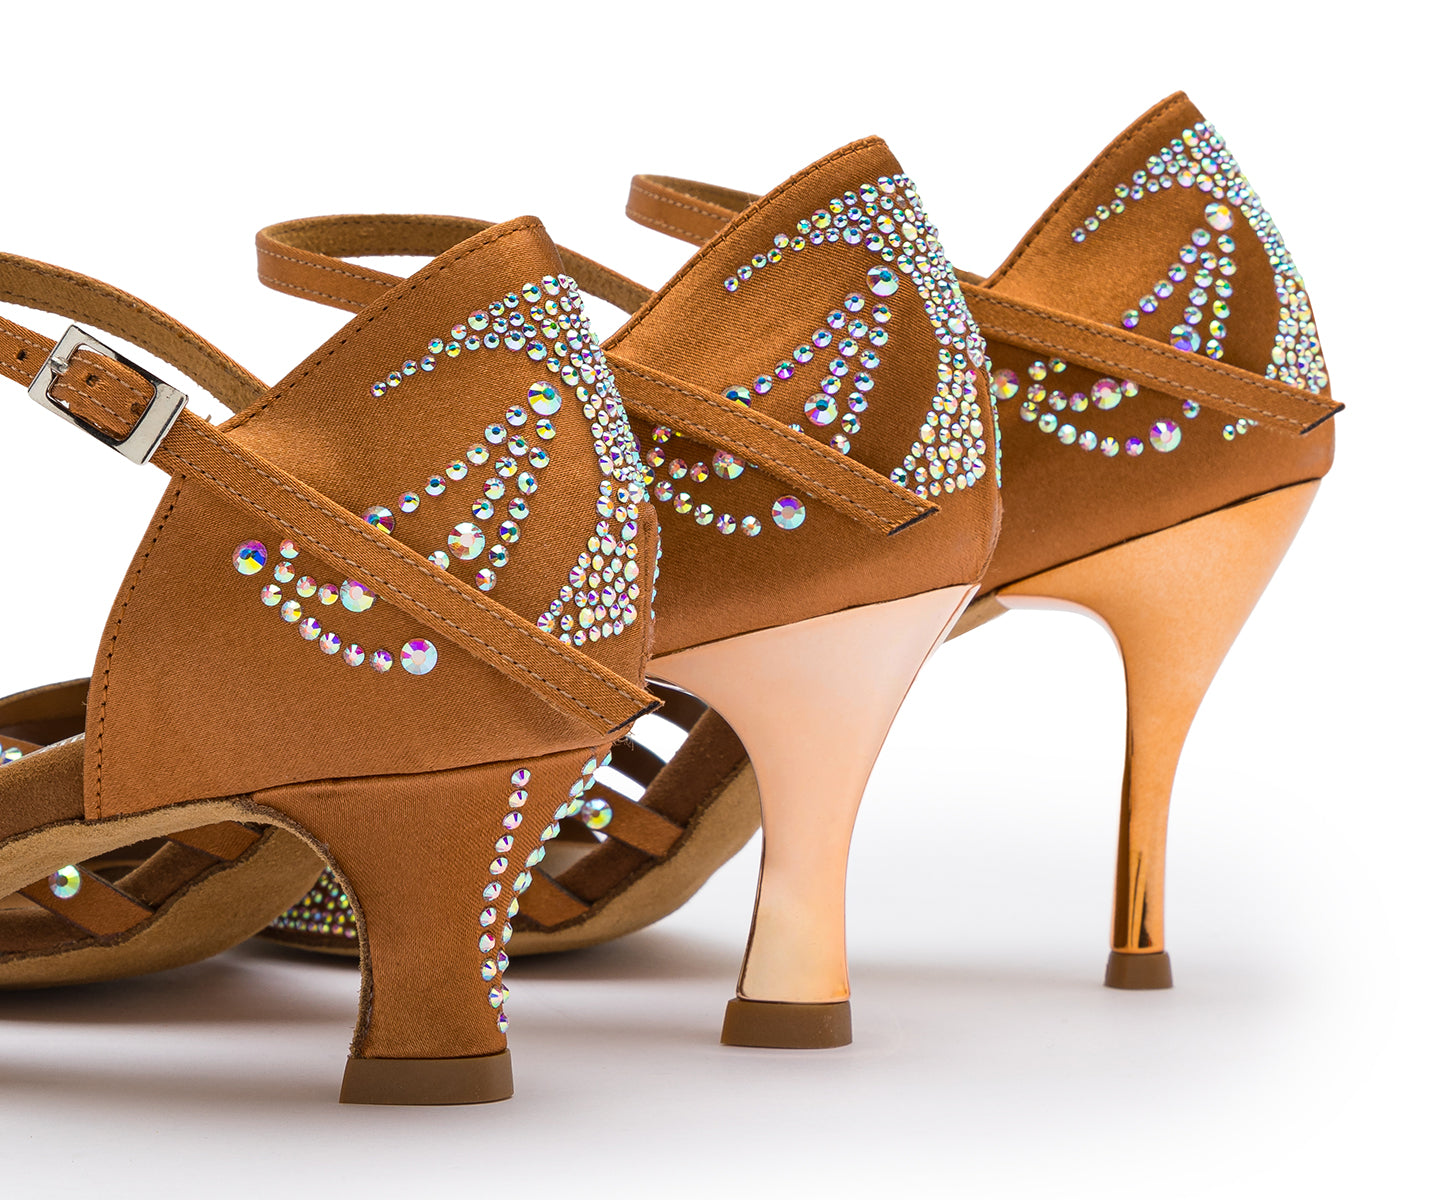 DQ L3m dance shoes in Tan with rhinestones